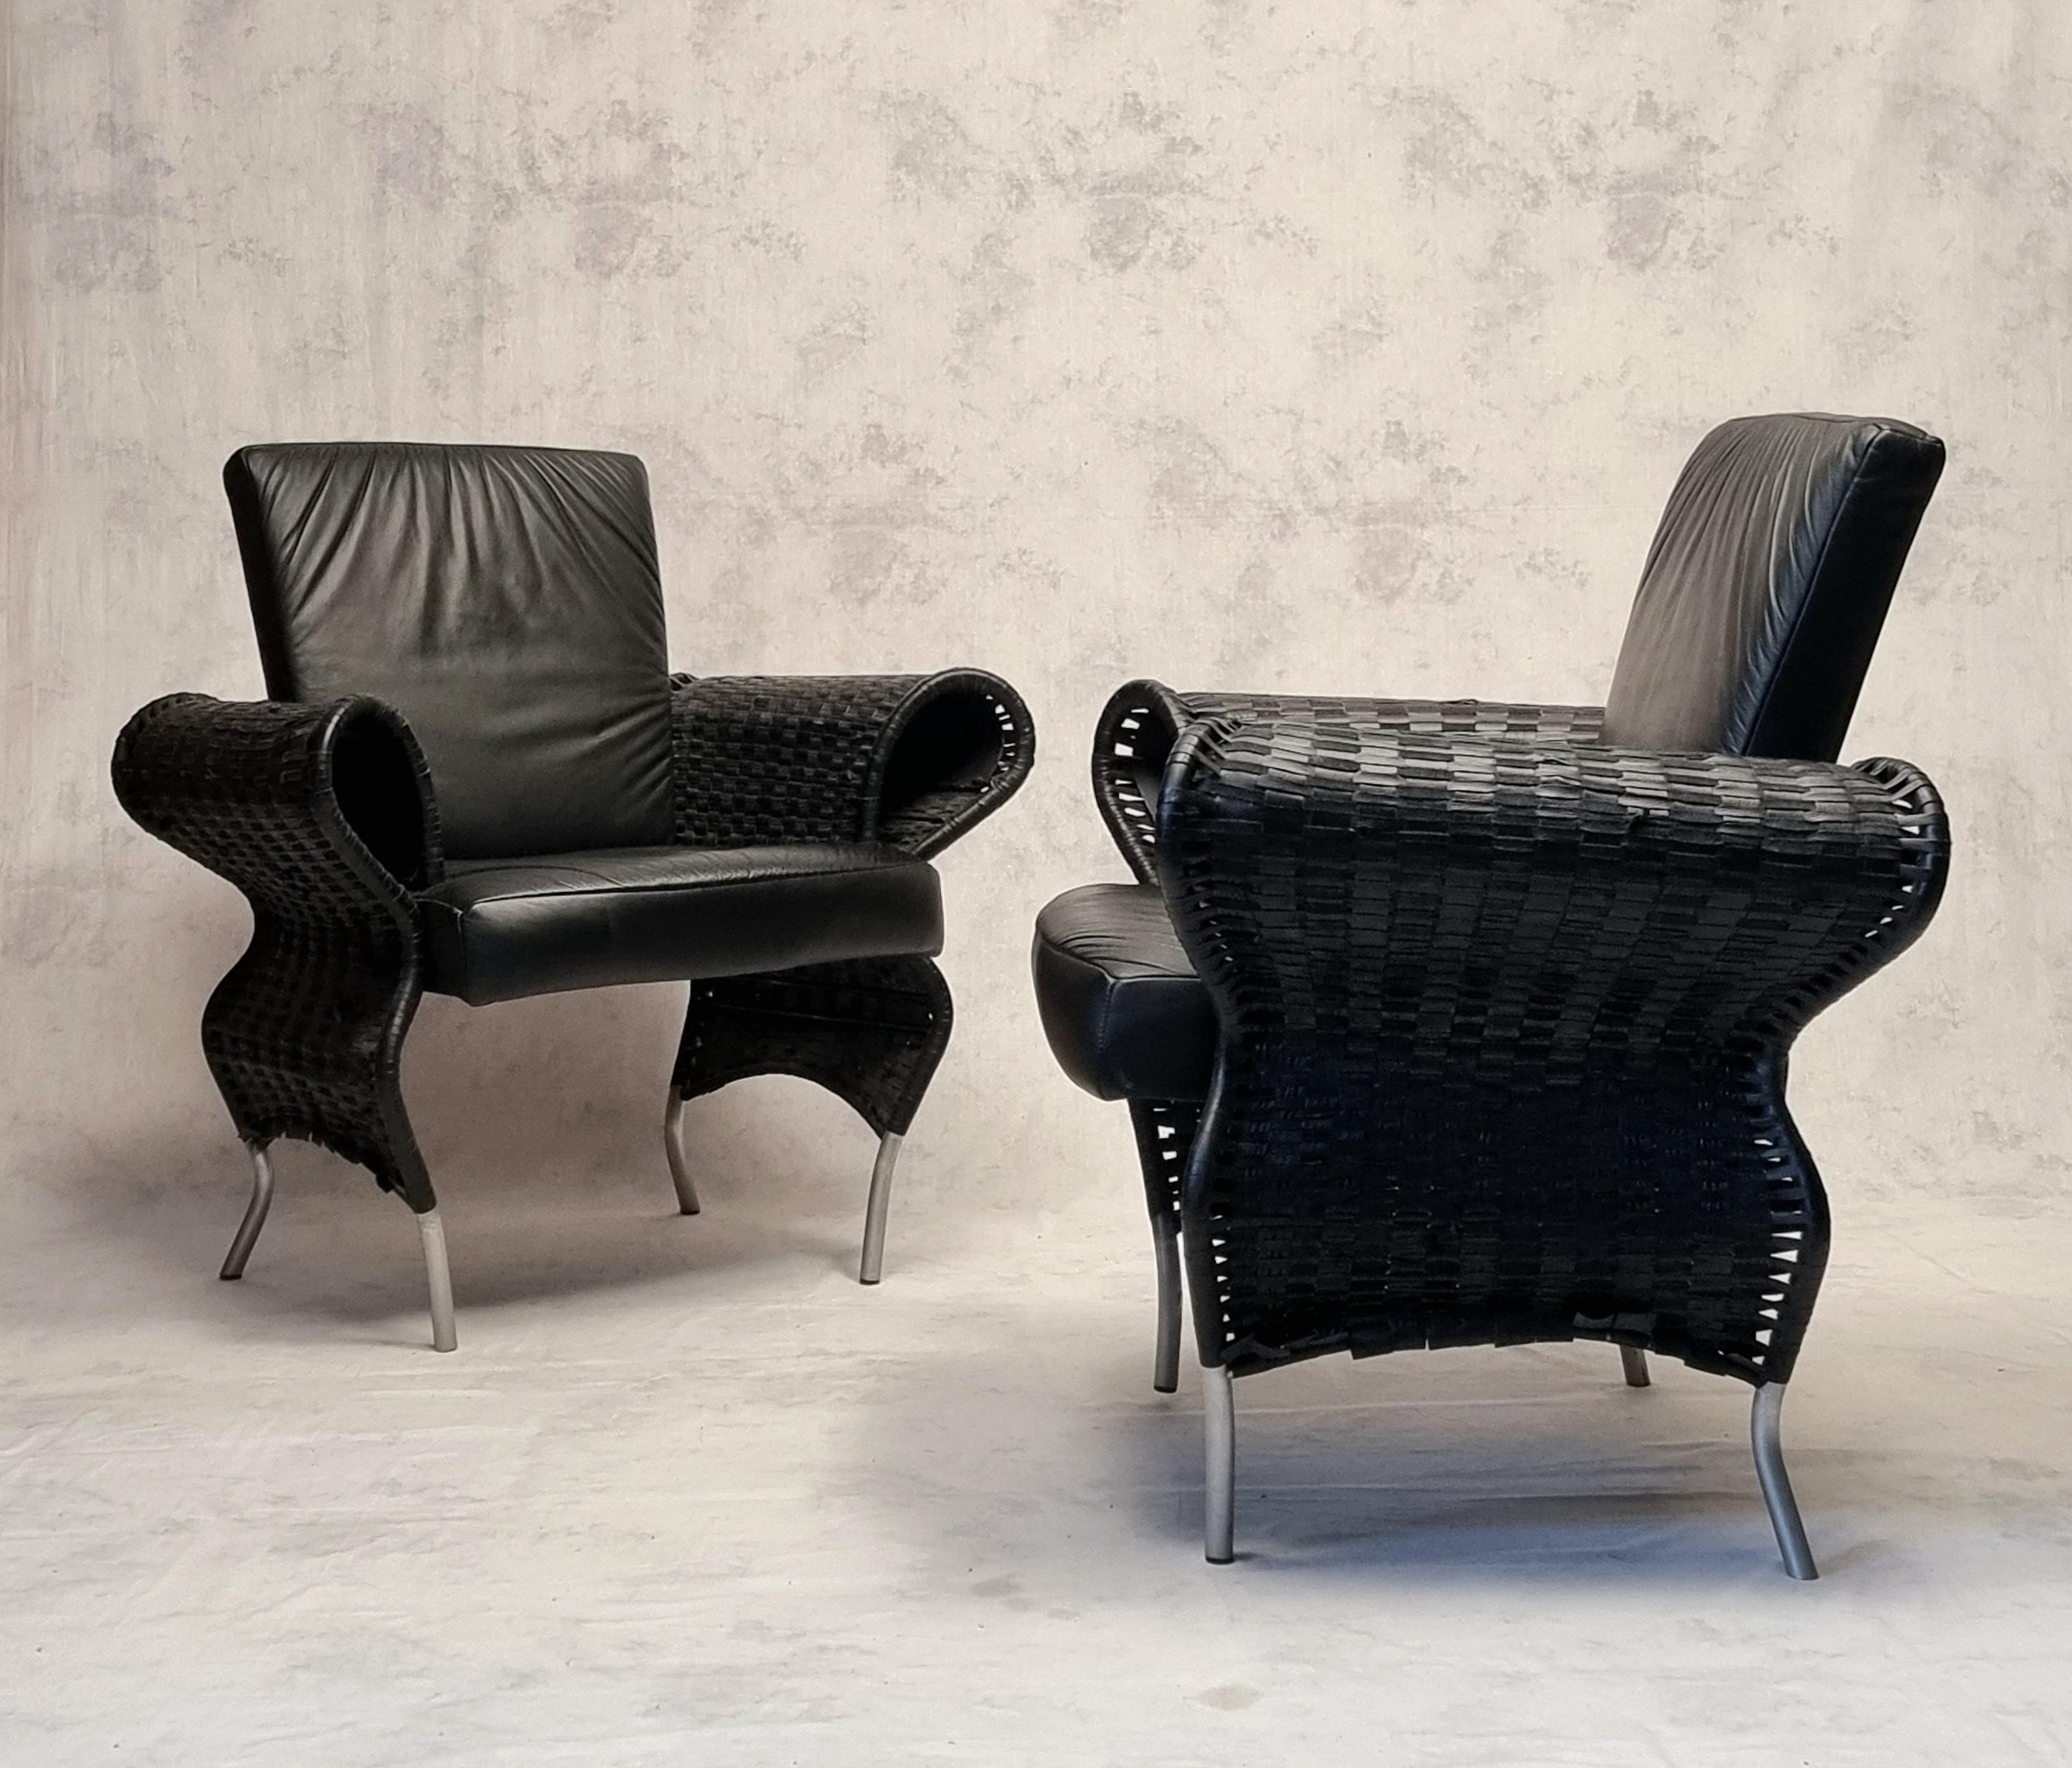 Surprising pair of armchairs by Czech designer and architect Borek Sipek. Borek Sipek is considered the father of the neo-baroque style. He floods the world with his creations with surprising curves and eccentric designs. From furniture to tableware